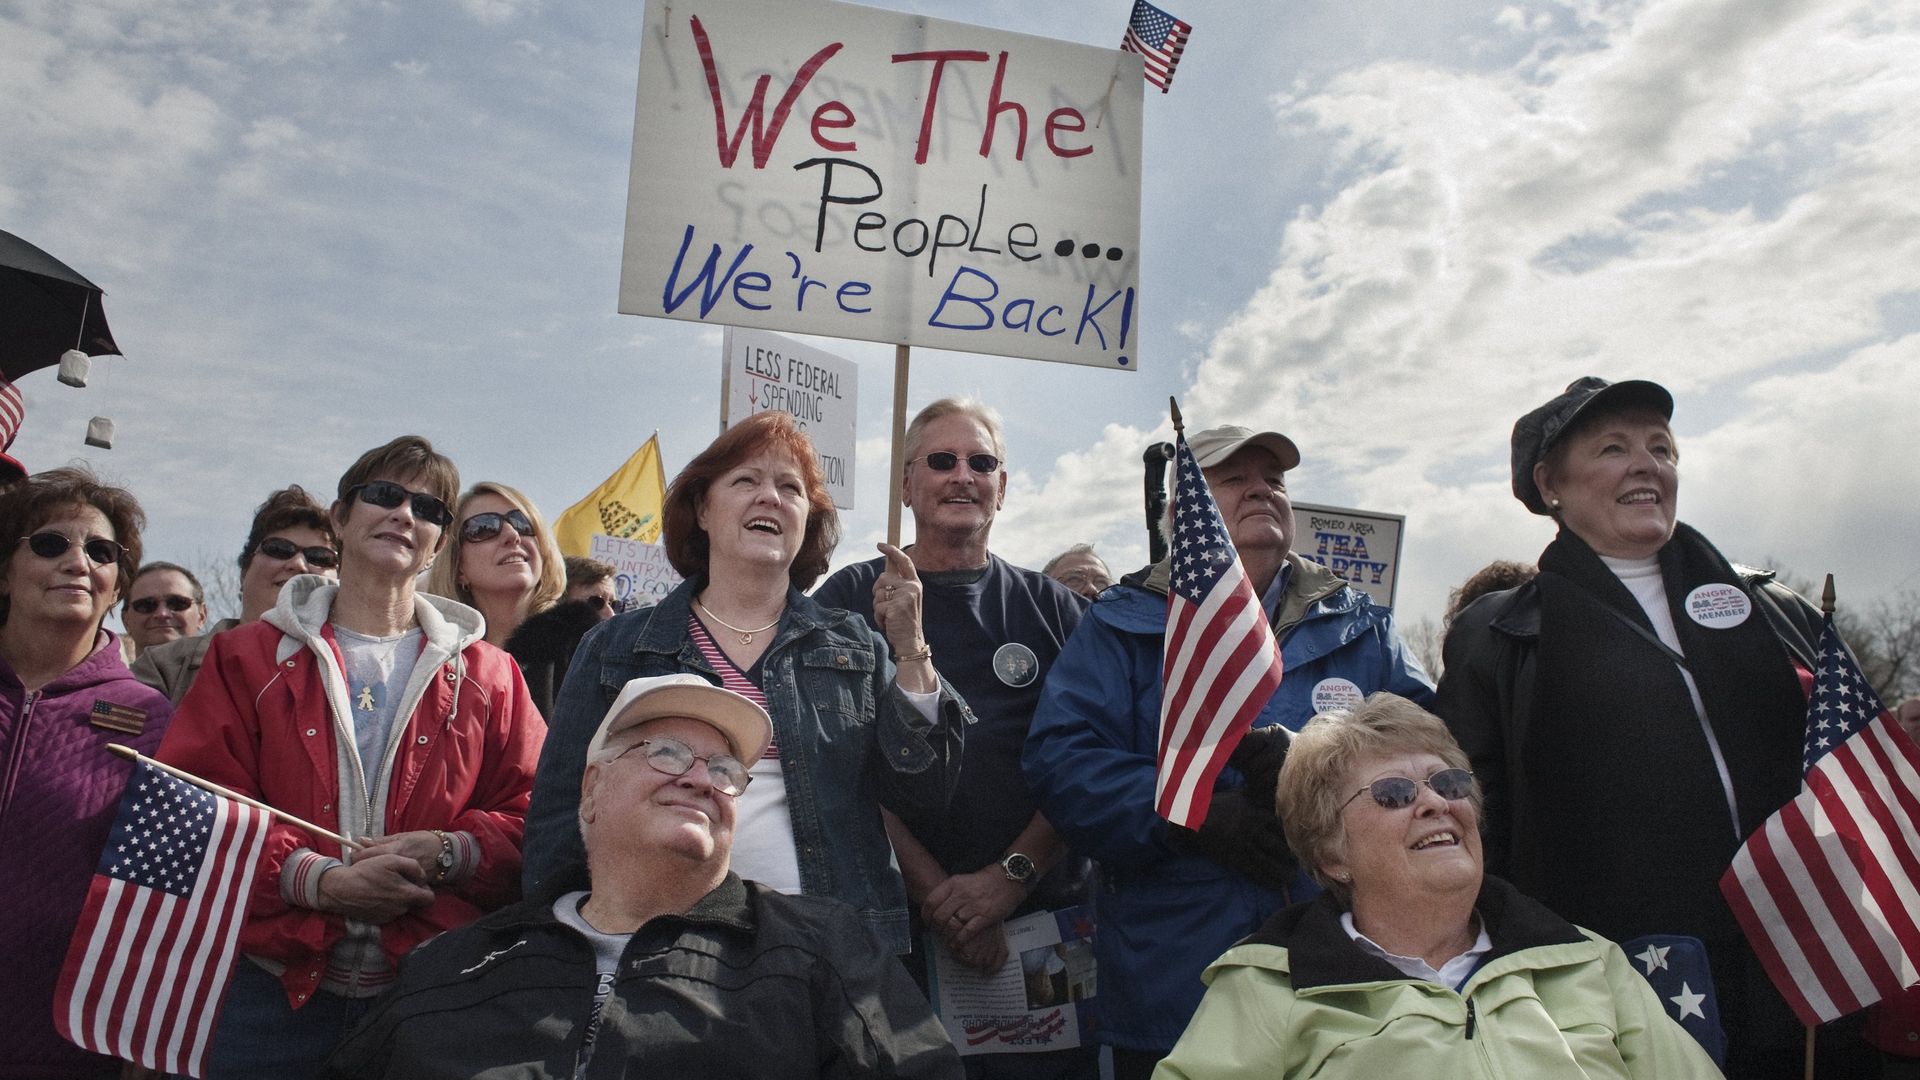 Supporters of the Tea Party movement listen to speakers at a Tea Party Express rally in 2010.